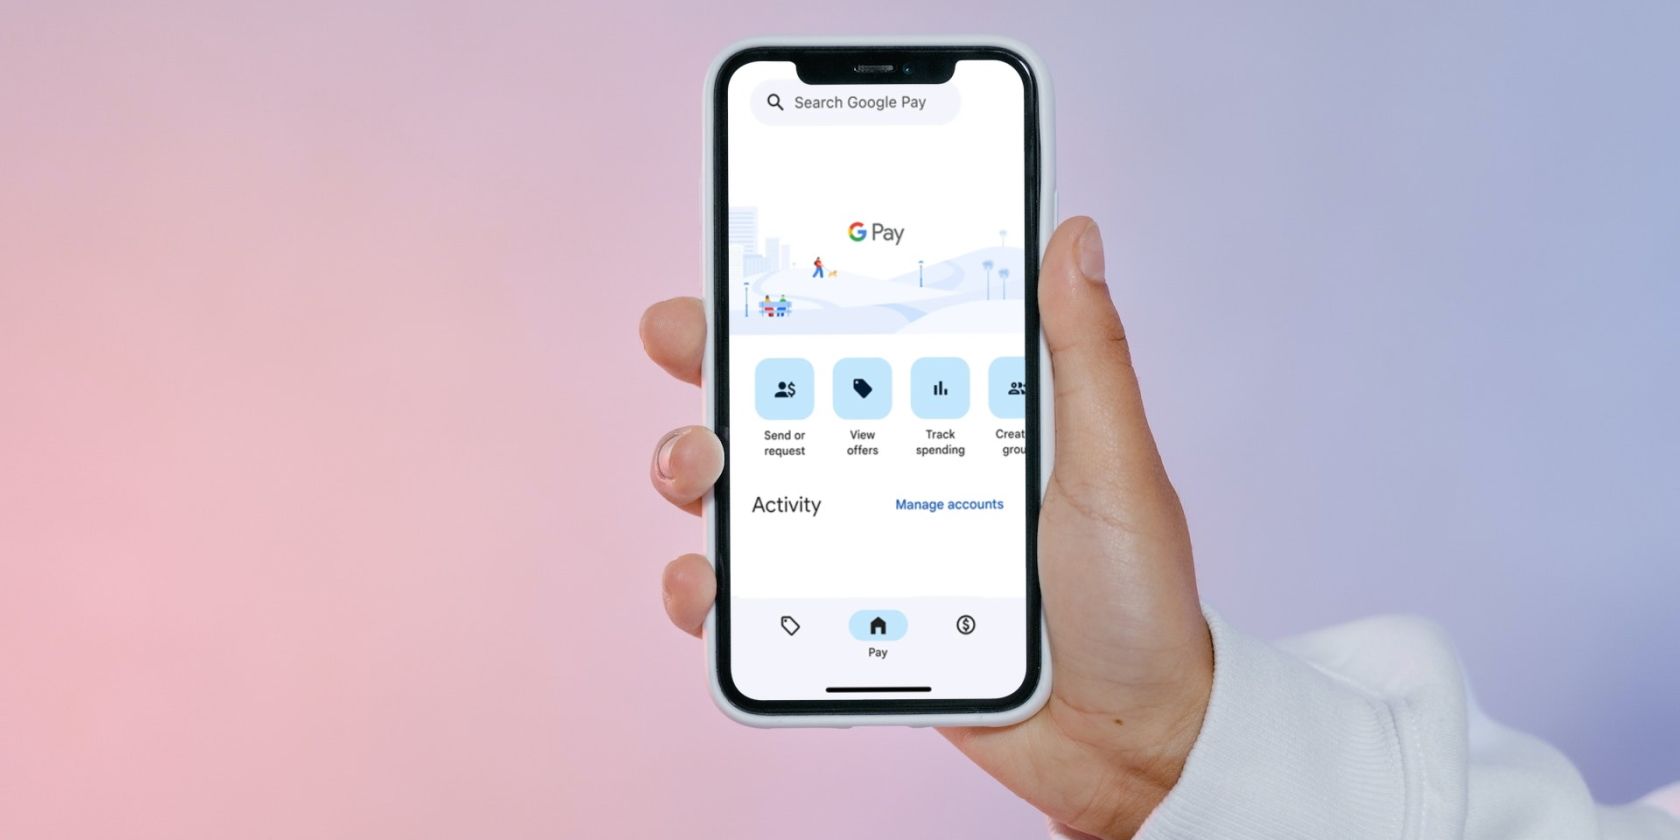 Google Pay running on an iPhone